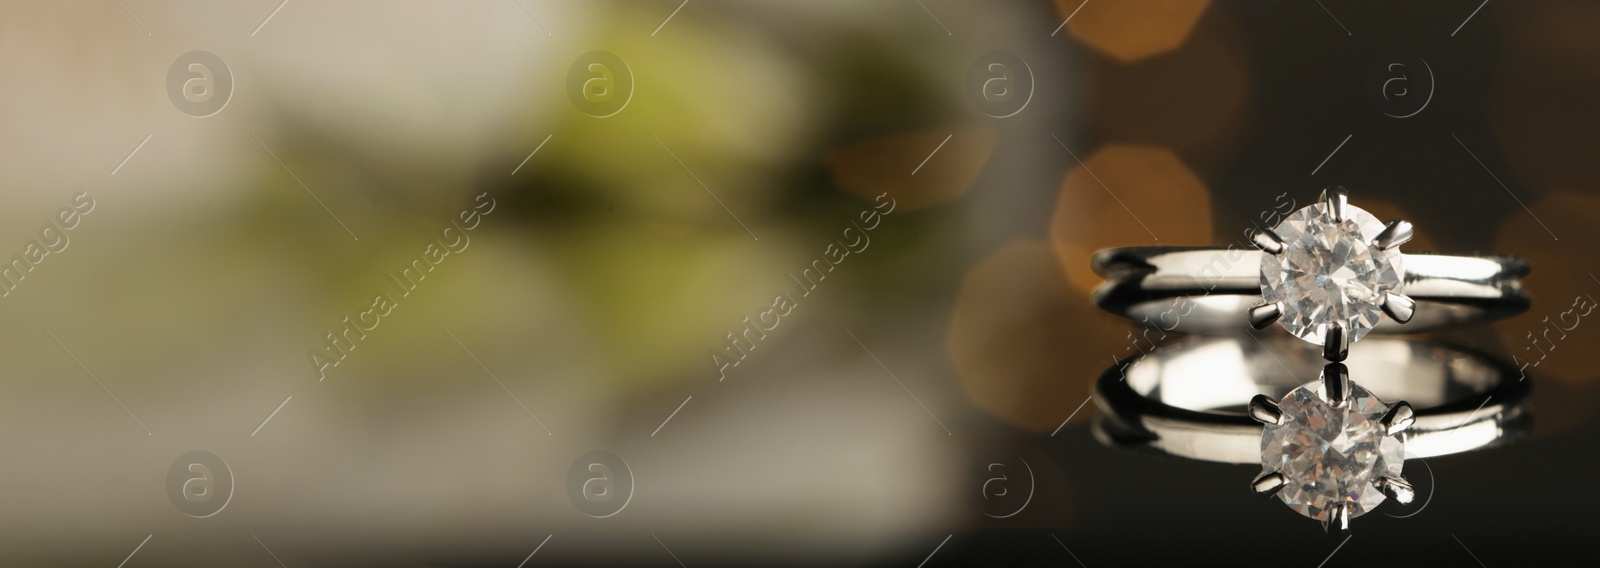 Image of Beautiful engagement ring against blurred festive lights, closeup view with space for text. Banner design